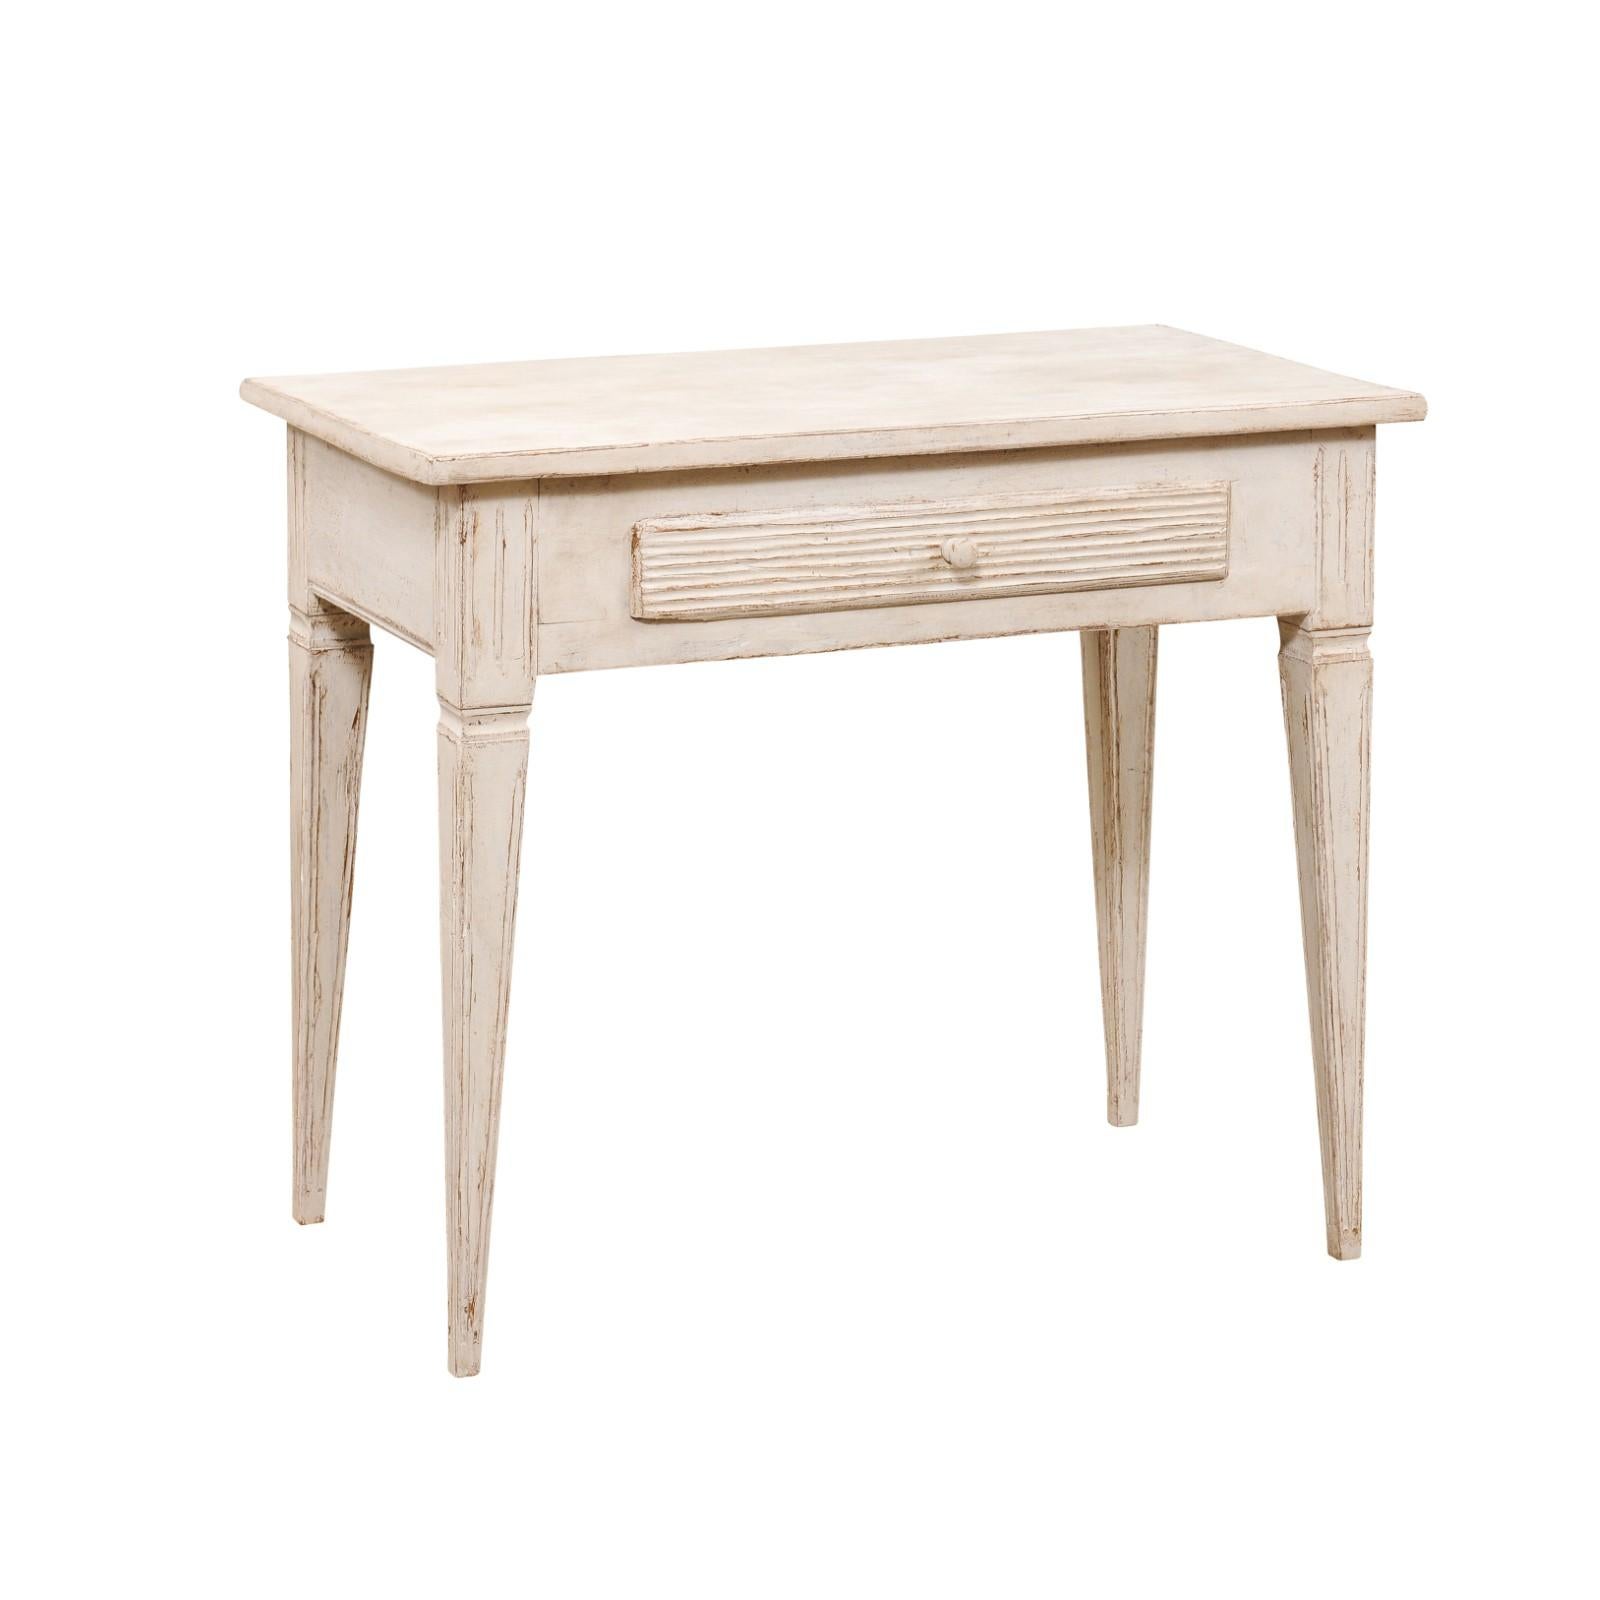 A Swedish Gustavian style painted wood side table from the late 19th century, with single drawer, reeded accents and tapered legs. Created in Sweden during the last quarter of the 19th century, this side table features a rectangular top sitting